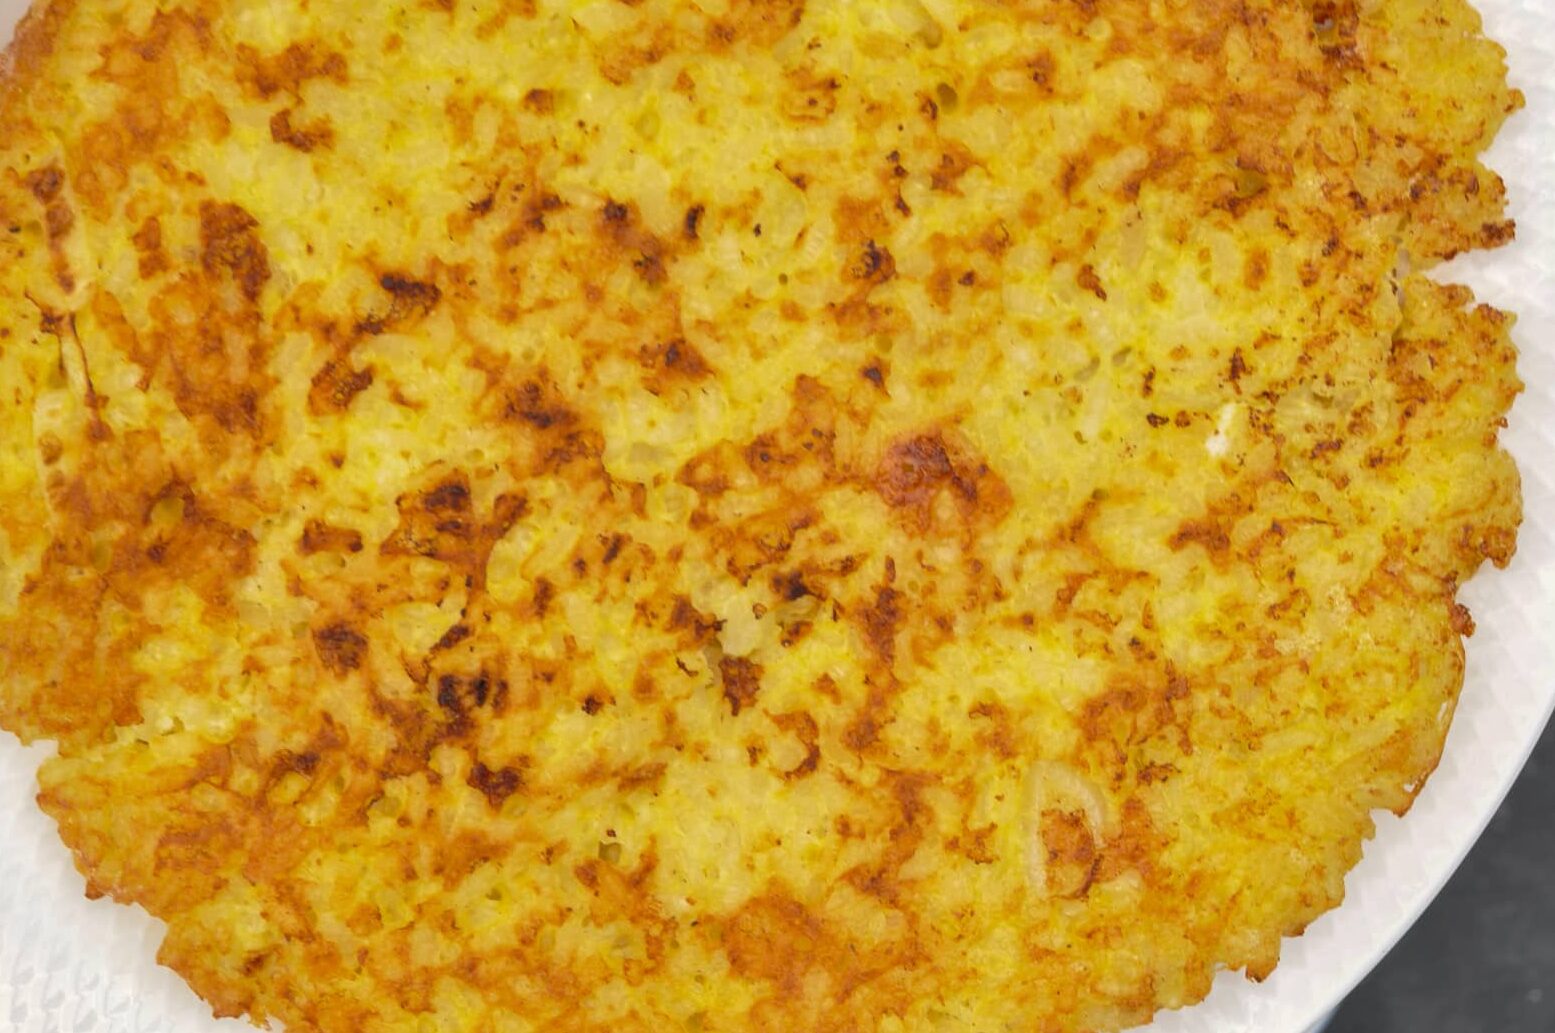 crispy top of the risotto cake